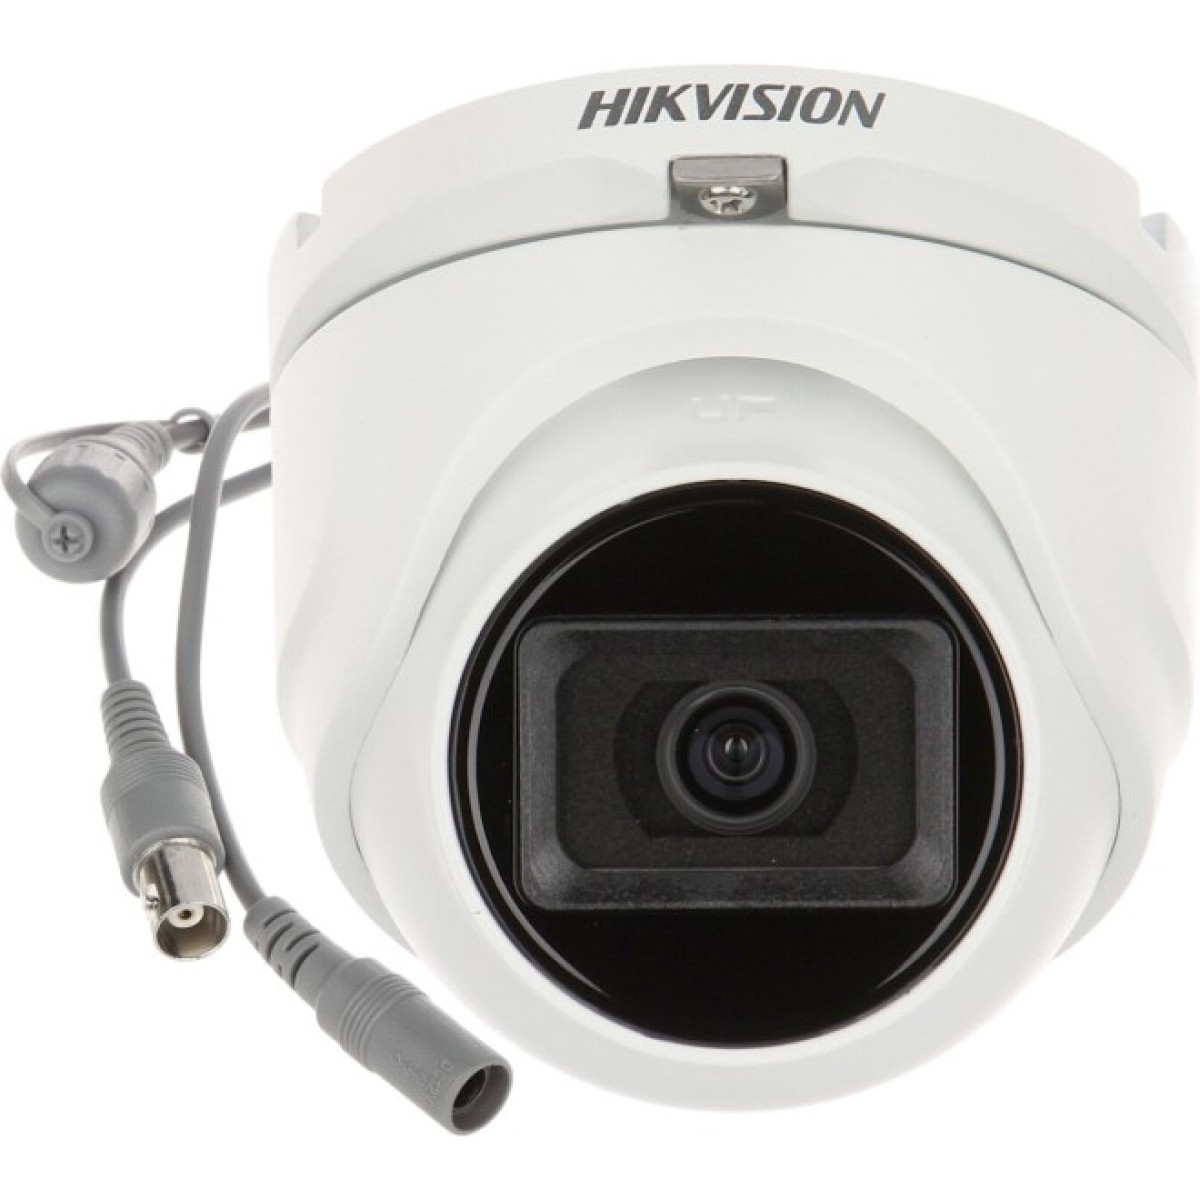 Камера Hikvision DS-2CE76H0T-ITMF (2.8) 98_98.jpg - фото 2